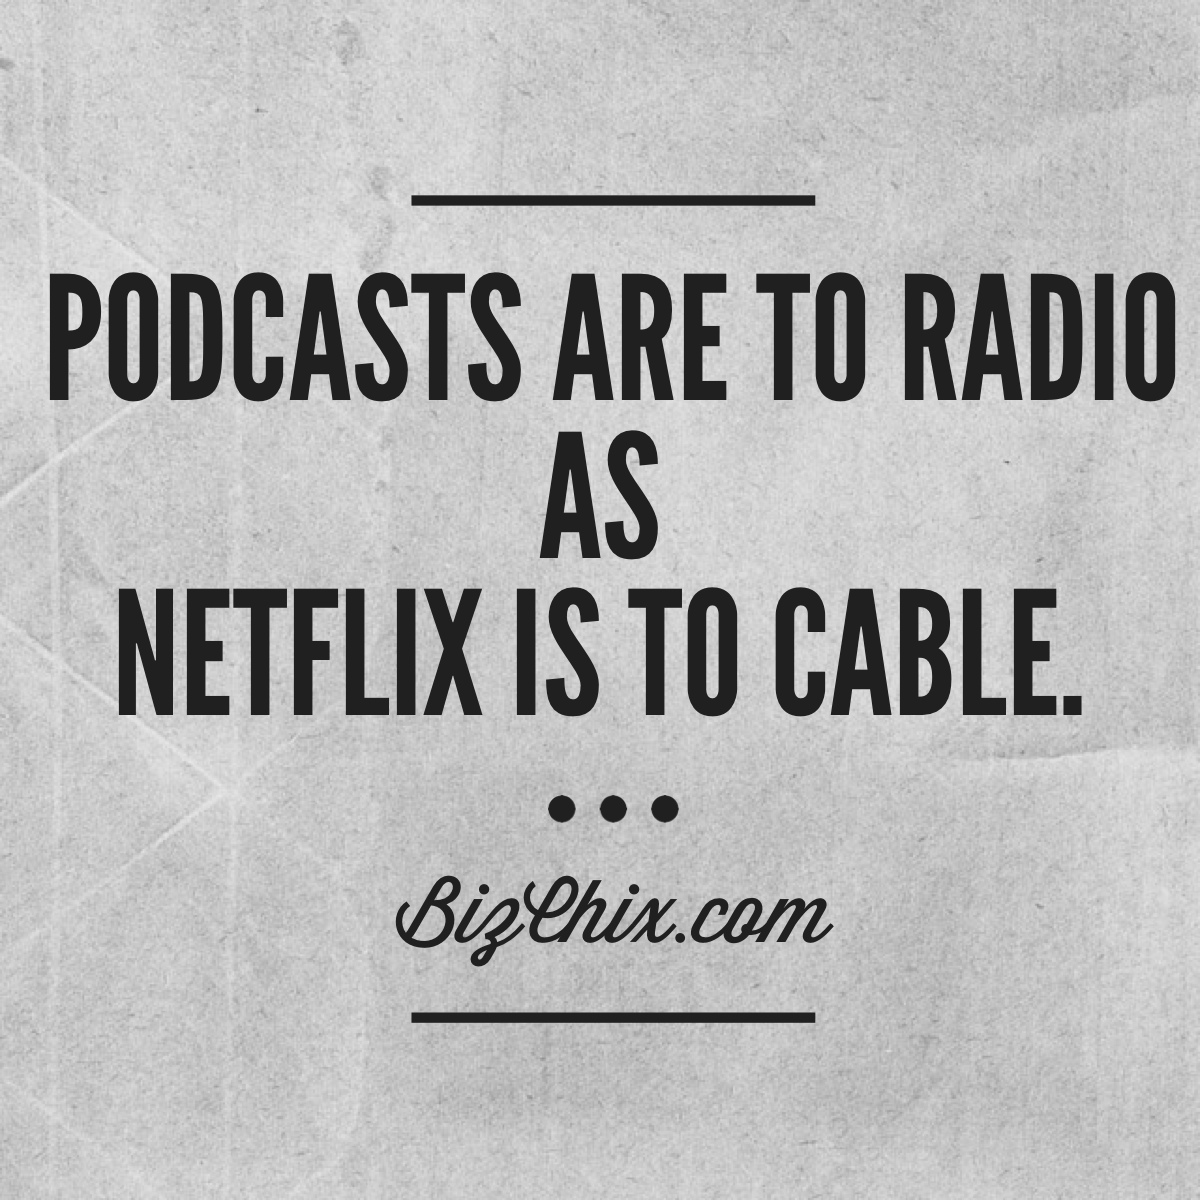 Image with the text "Podcasts are to radio as Netflix is to cable."